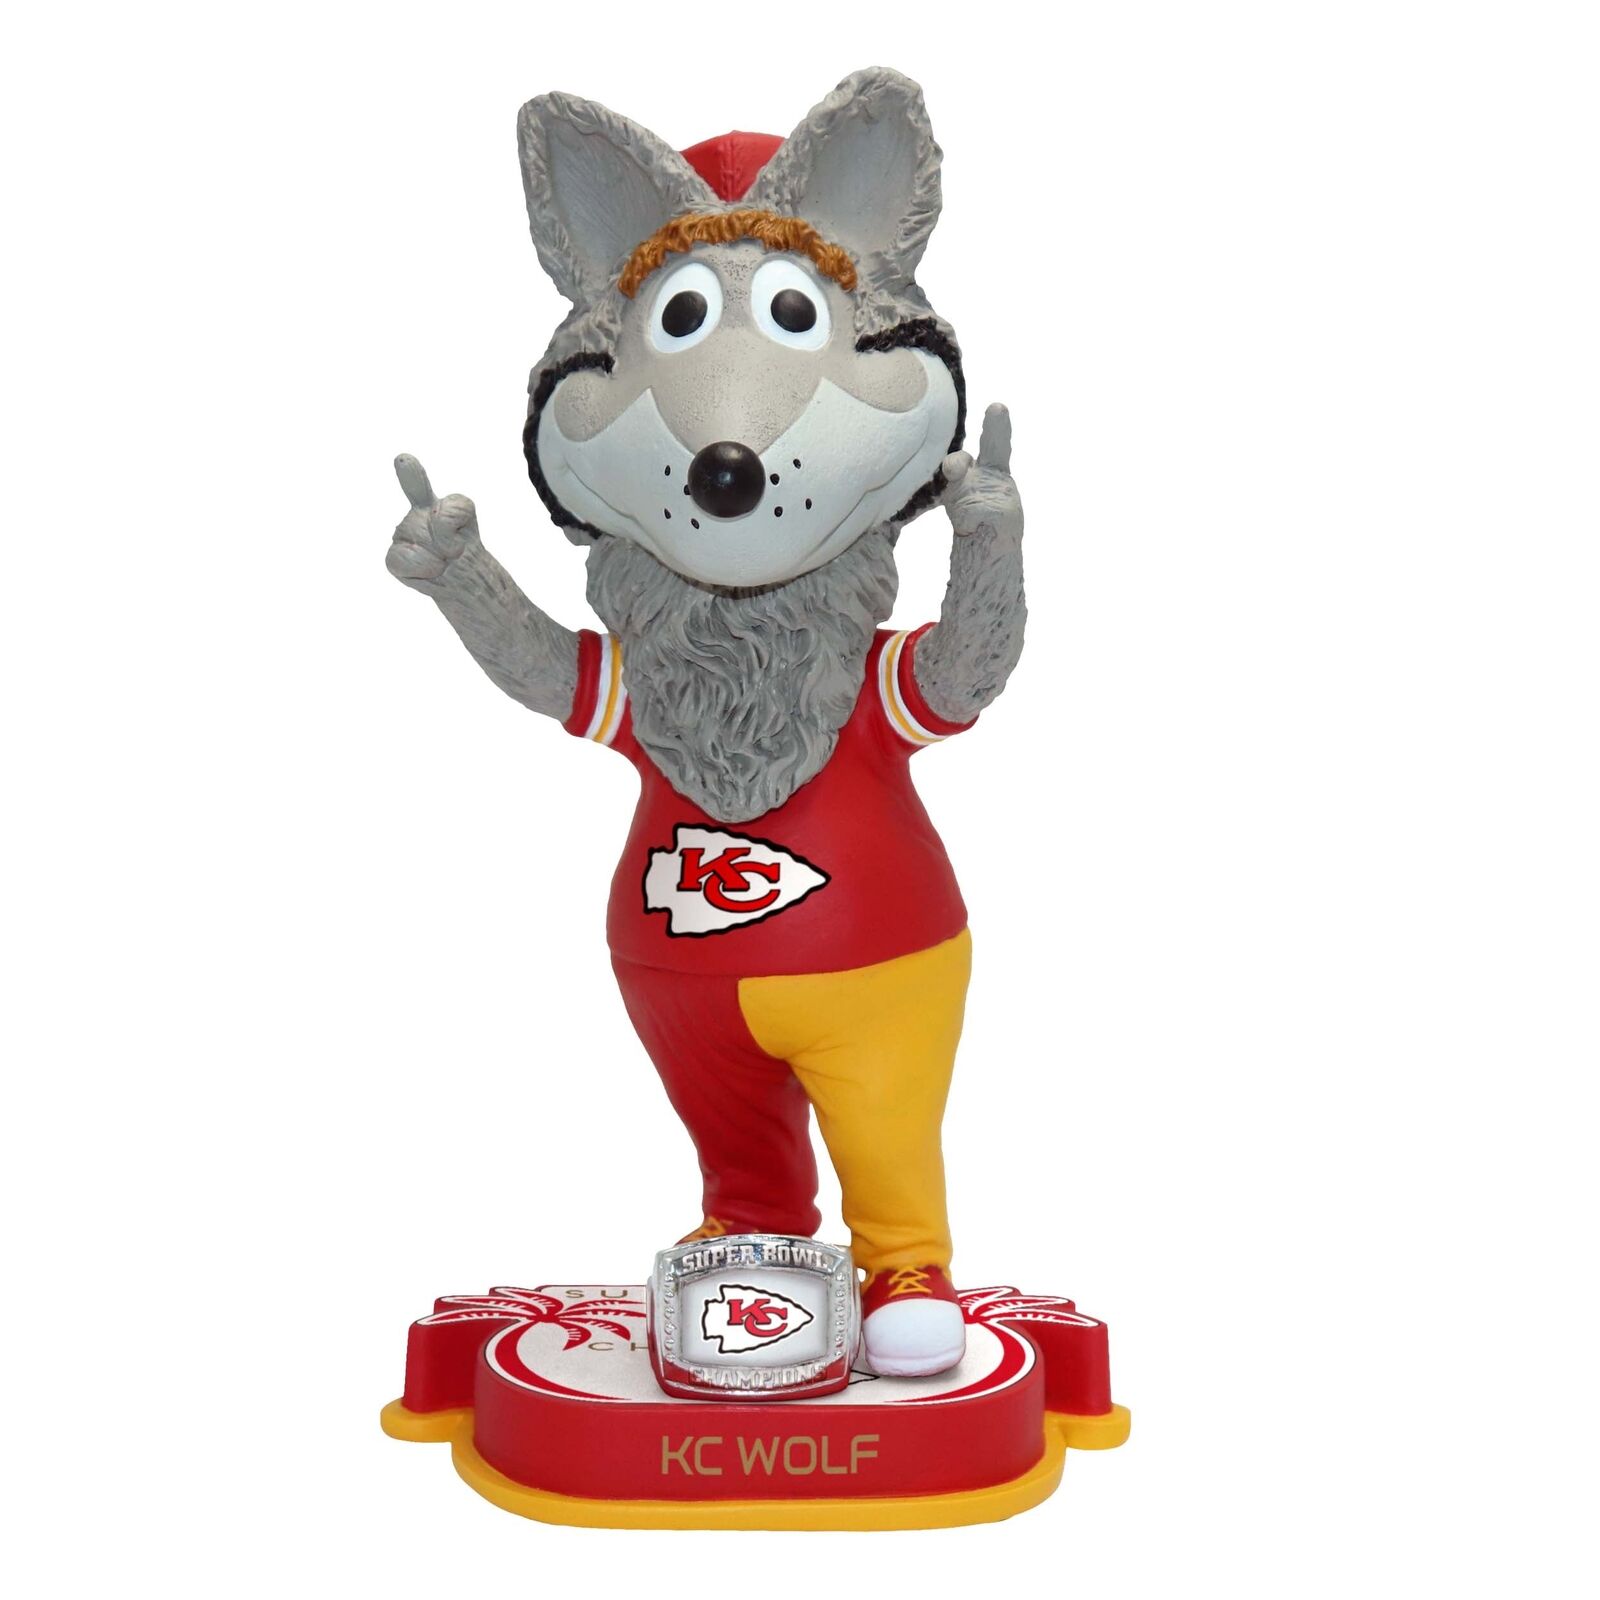 KC Wolf Kansas City Chiefs 2019 Stanley Cup Champions Bobblehead NFL Football